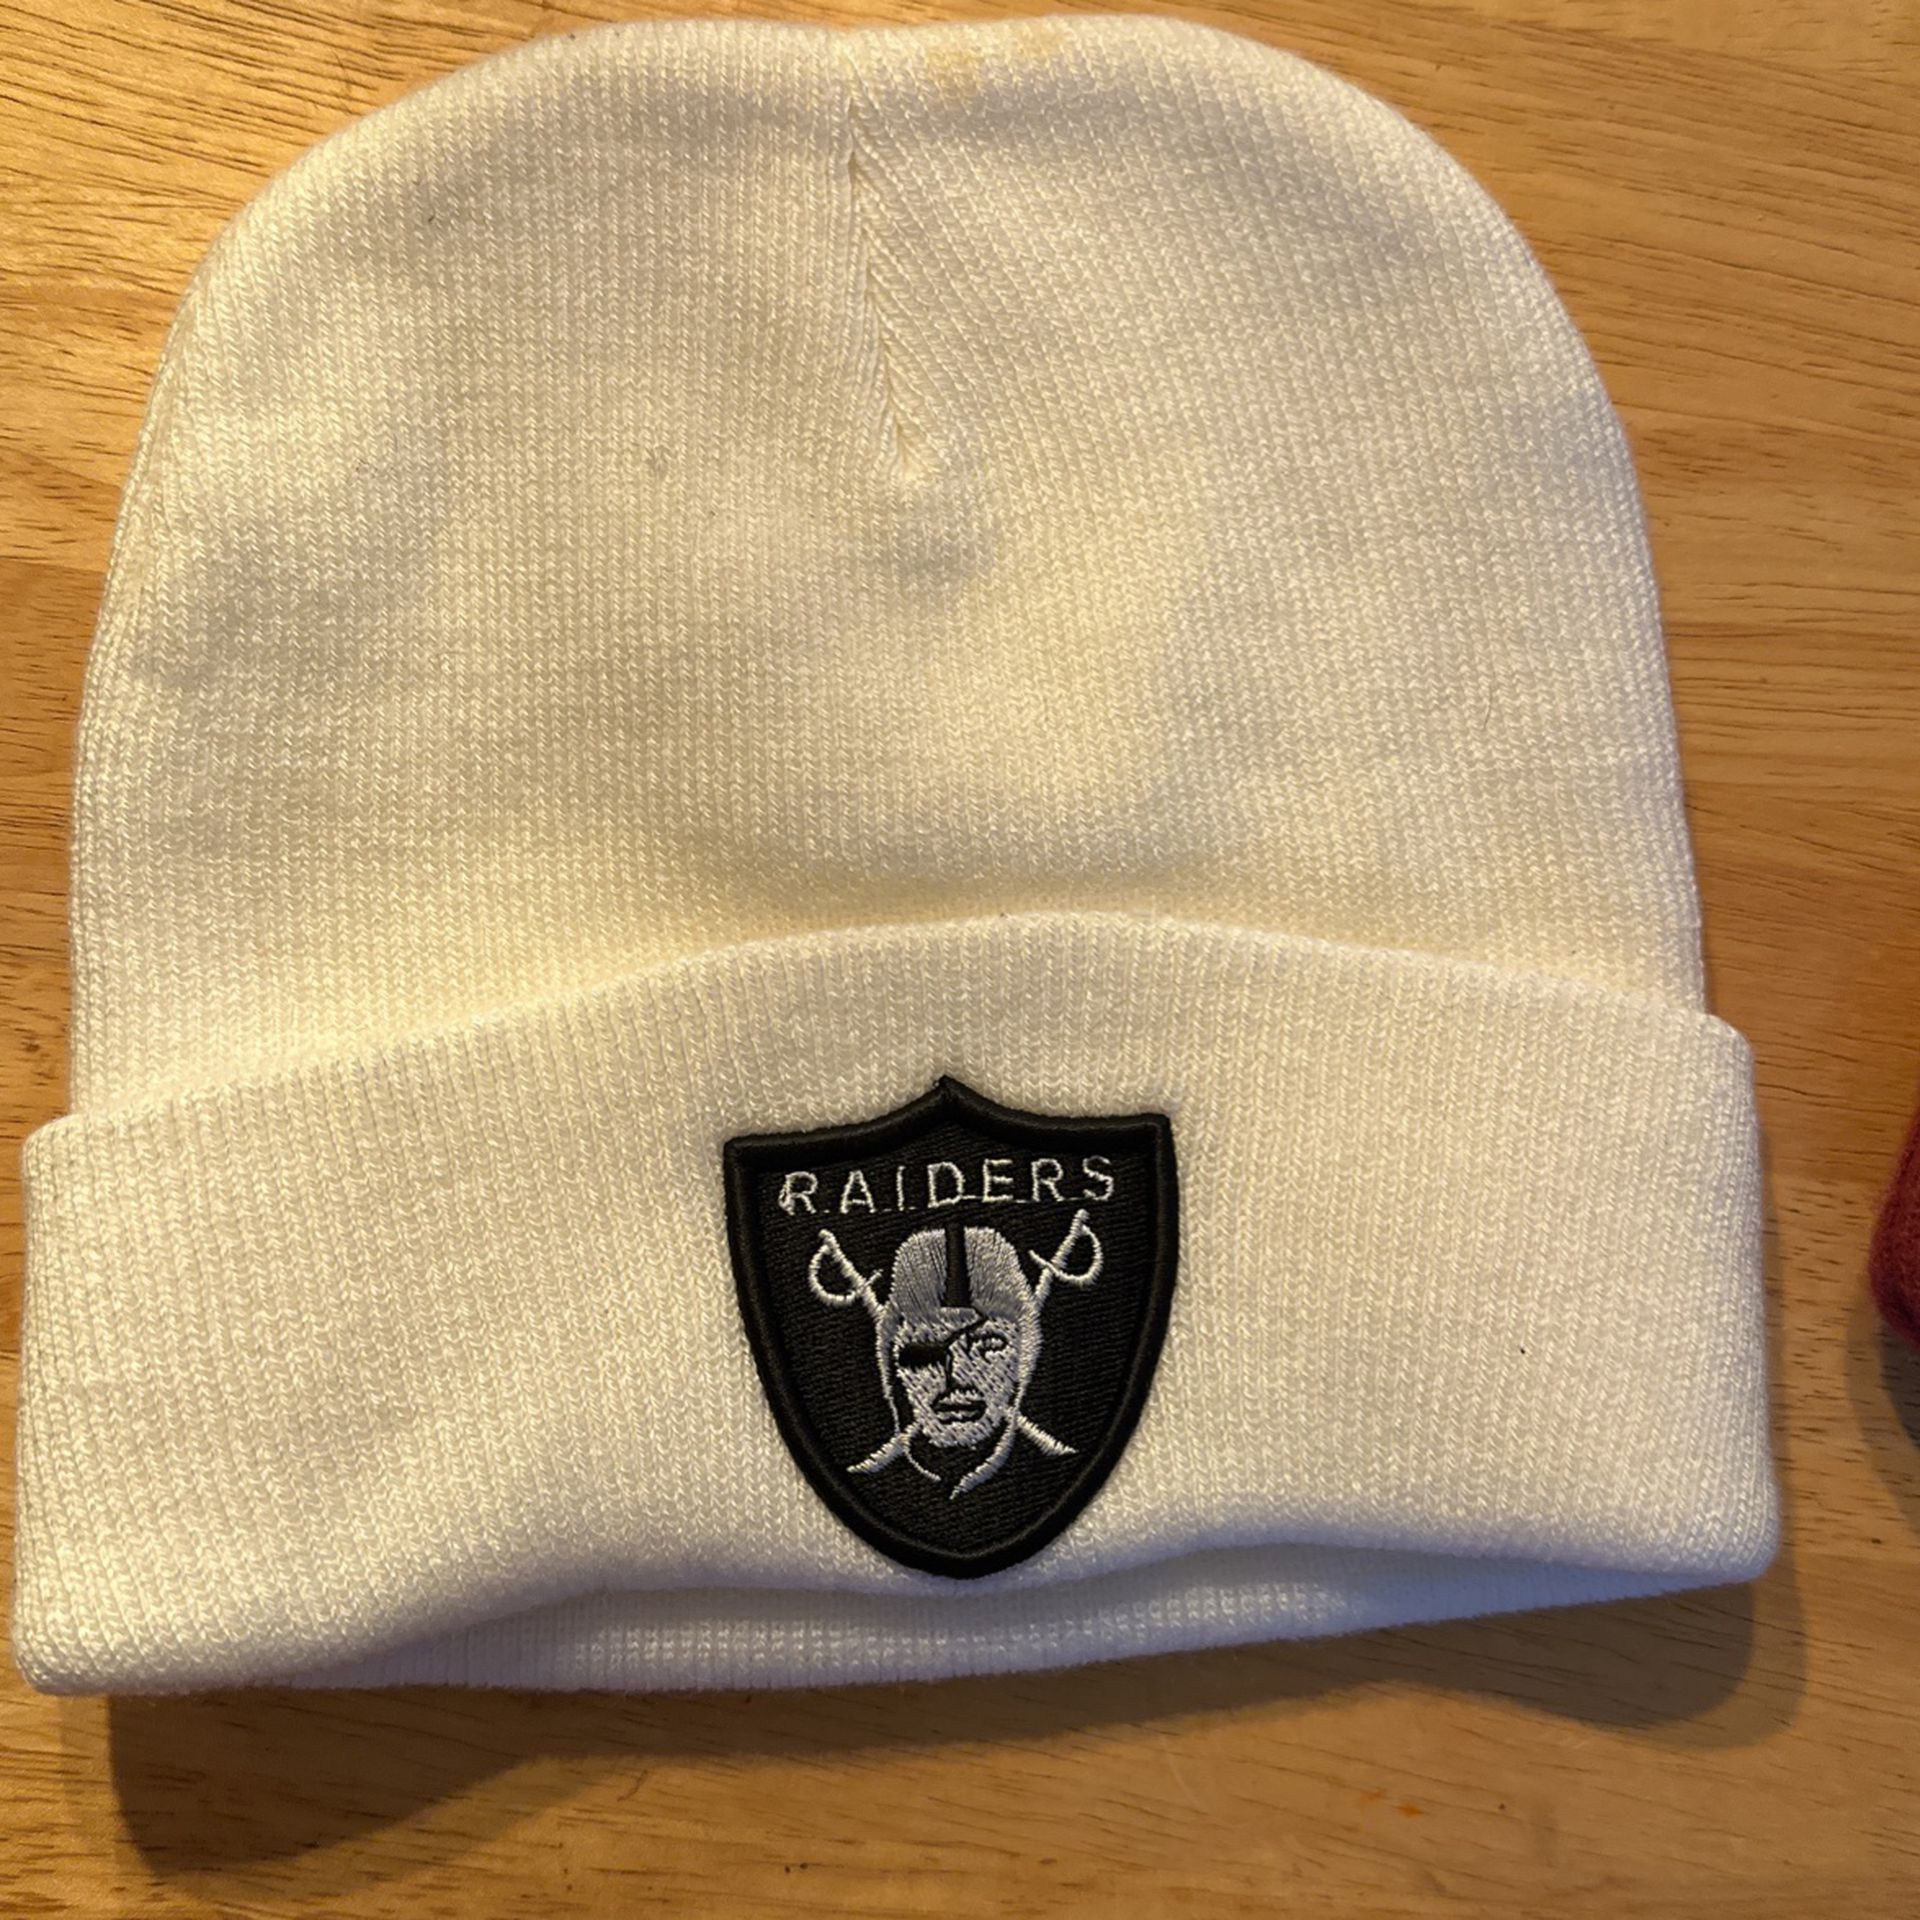 Raider Beanies $10 Both for Sale in Sacramento, CA - OfferUp